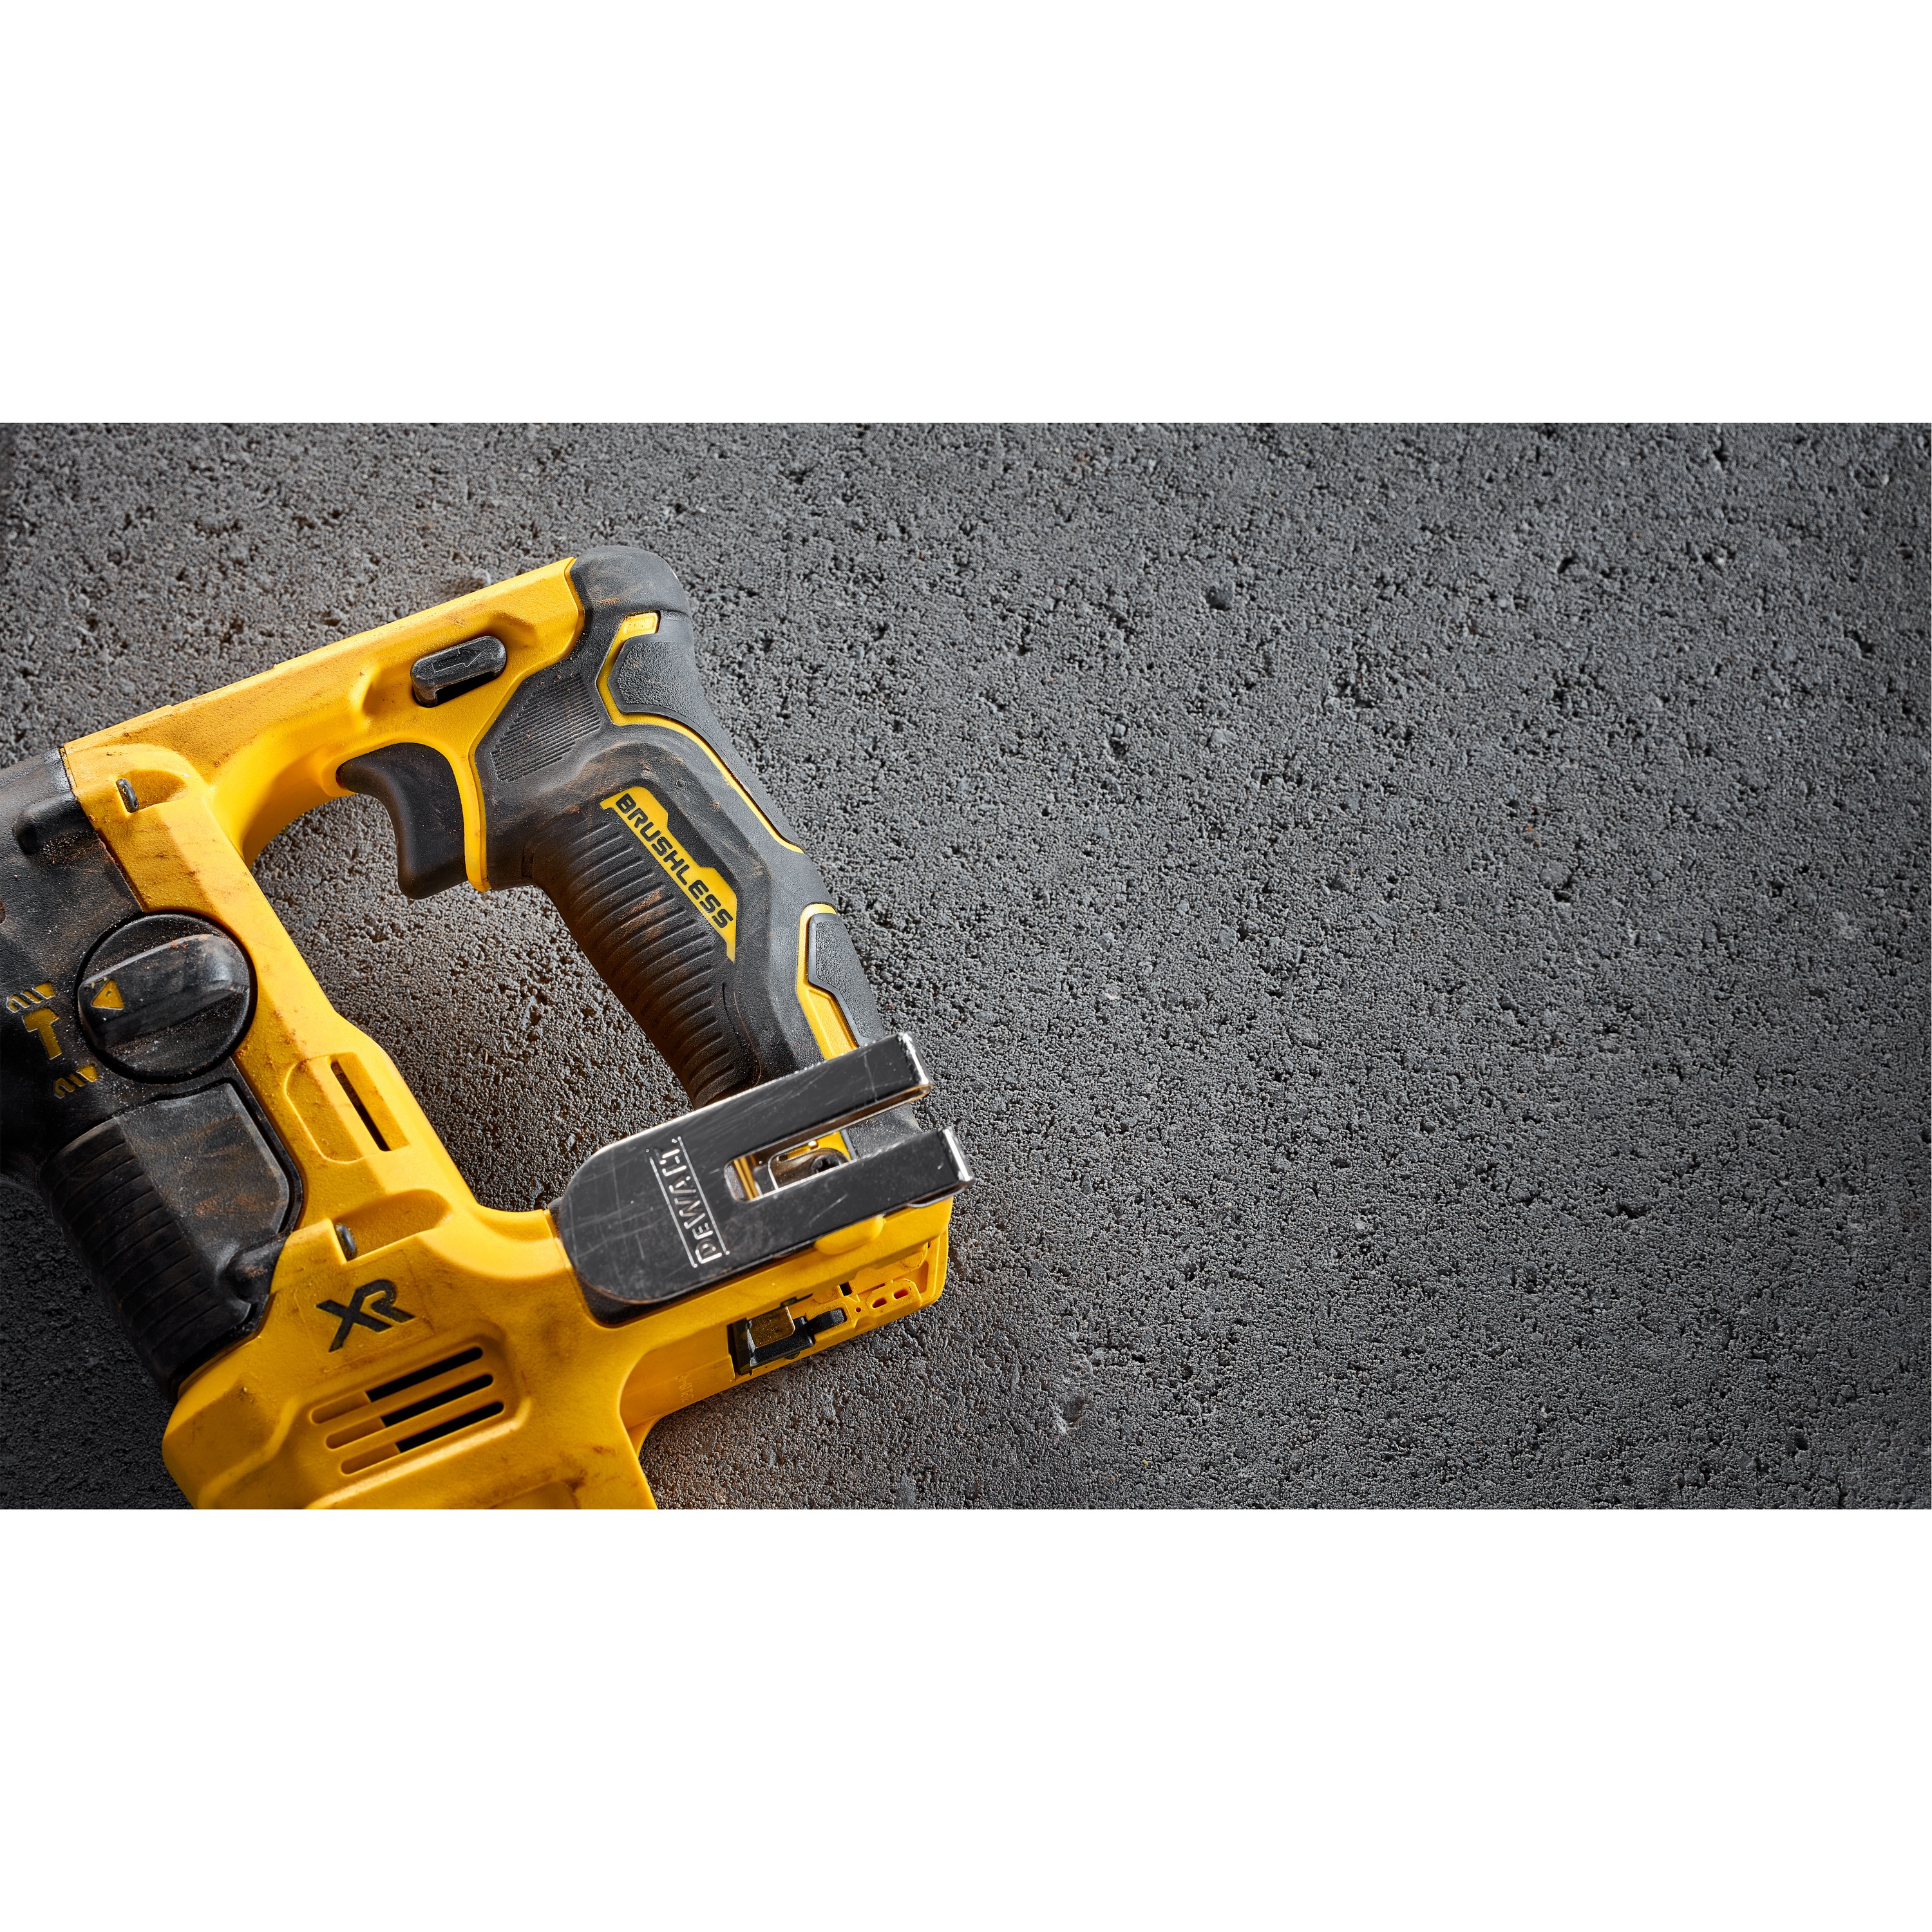 DEWALT - XTREME 12V MAX Brushless Cordless 916 in SDS PLUS Rotary Hammer Tool Only - DCH072B